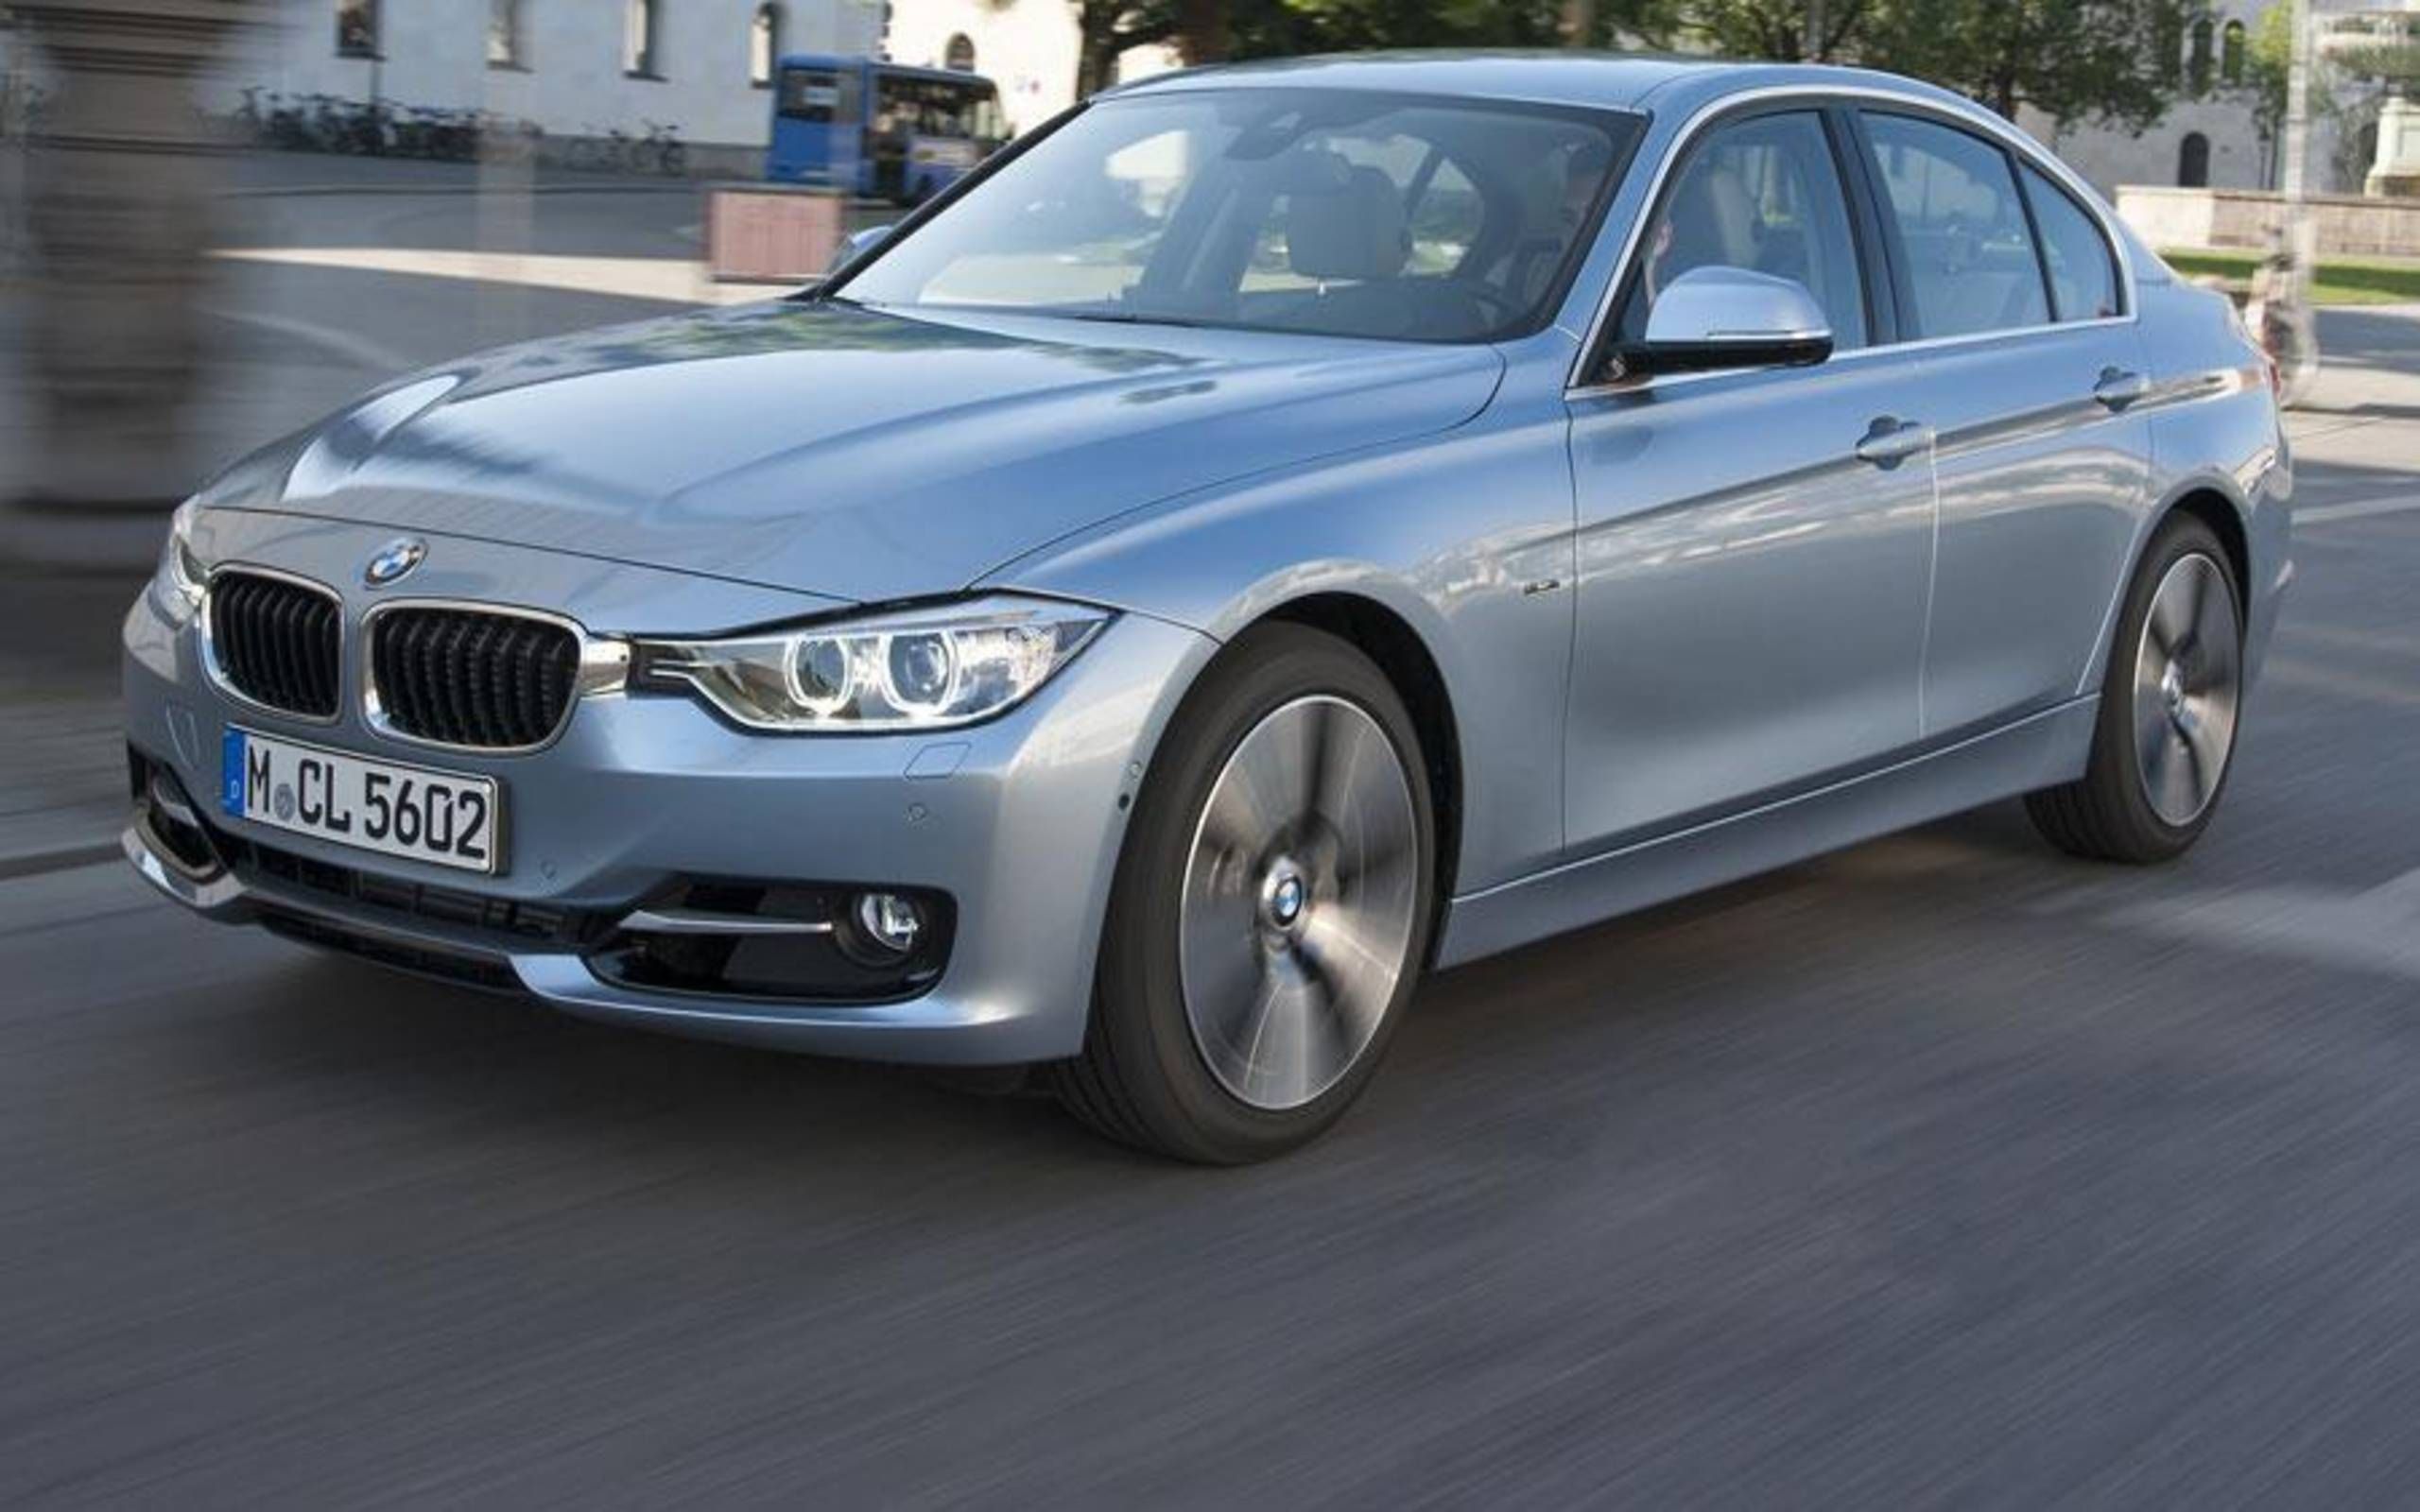 13 Bmw Activehybrid 3 Drive Review Hybrid 3 Series Is Faster Than Standard Issue 335i